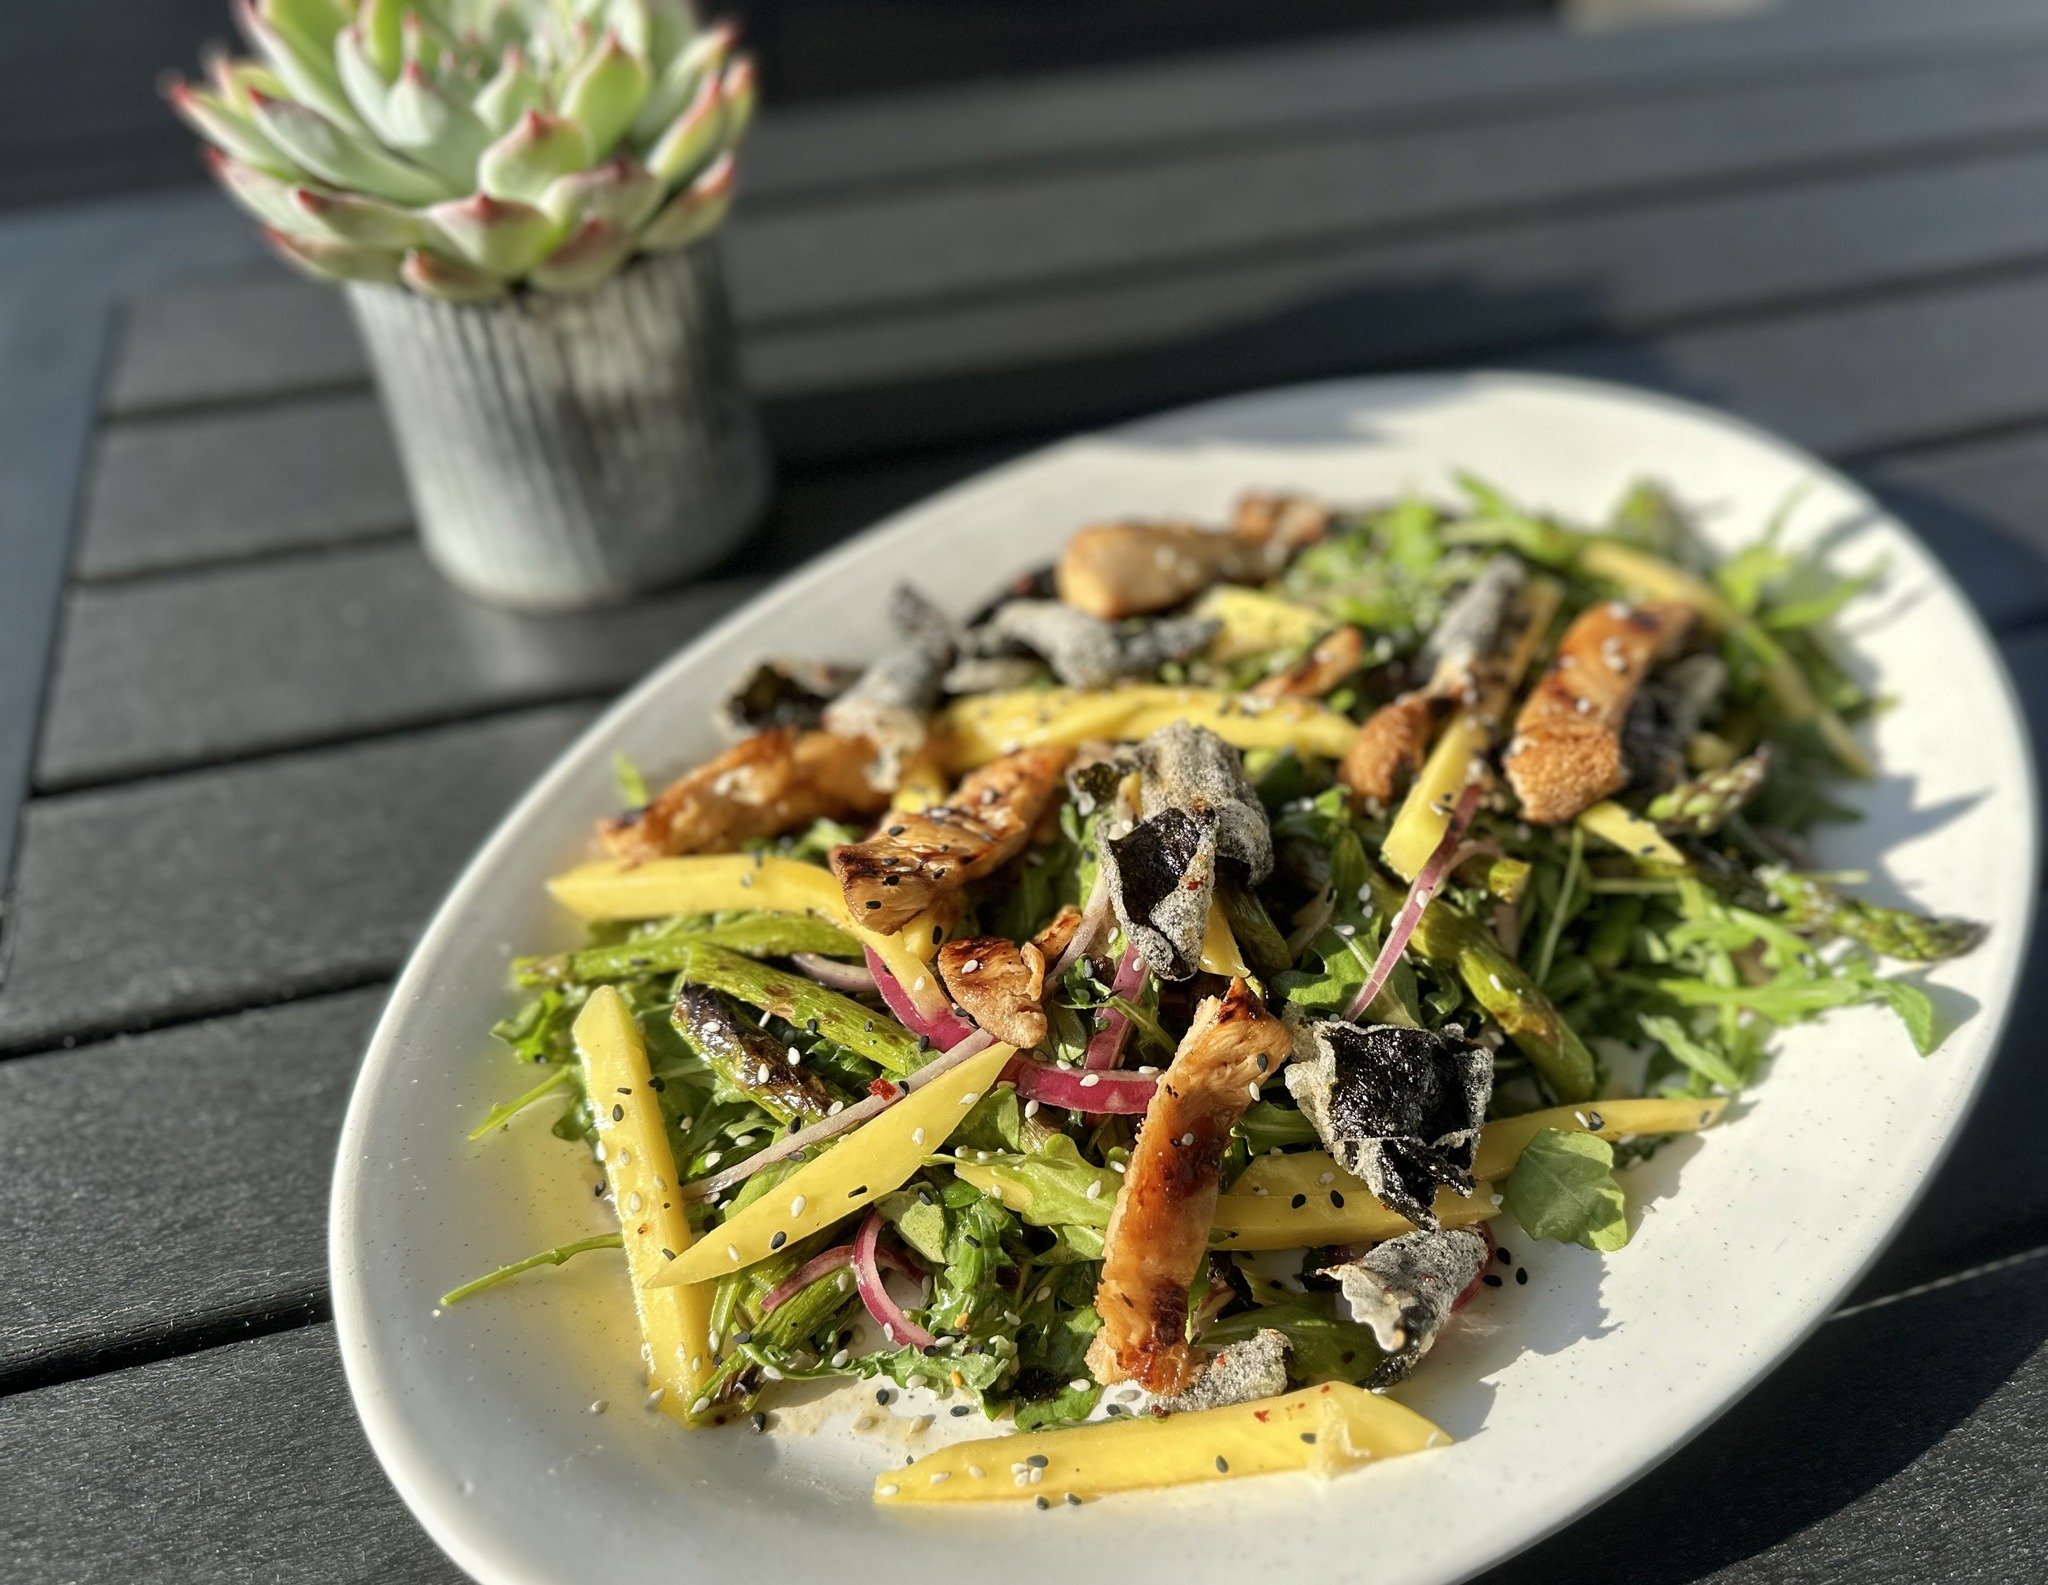 New specials drop... TODAY! Spears to You brought us their delicious, locally farmed asparagus from Harvard, IL which inspired this menu. Their season doesn't last long so check it out before you miss it!

Pictured here is our Vegan Mushroom Steak an